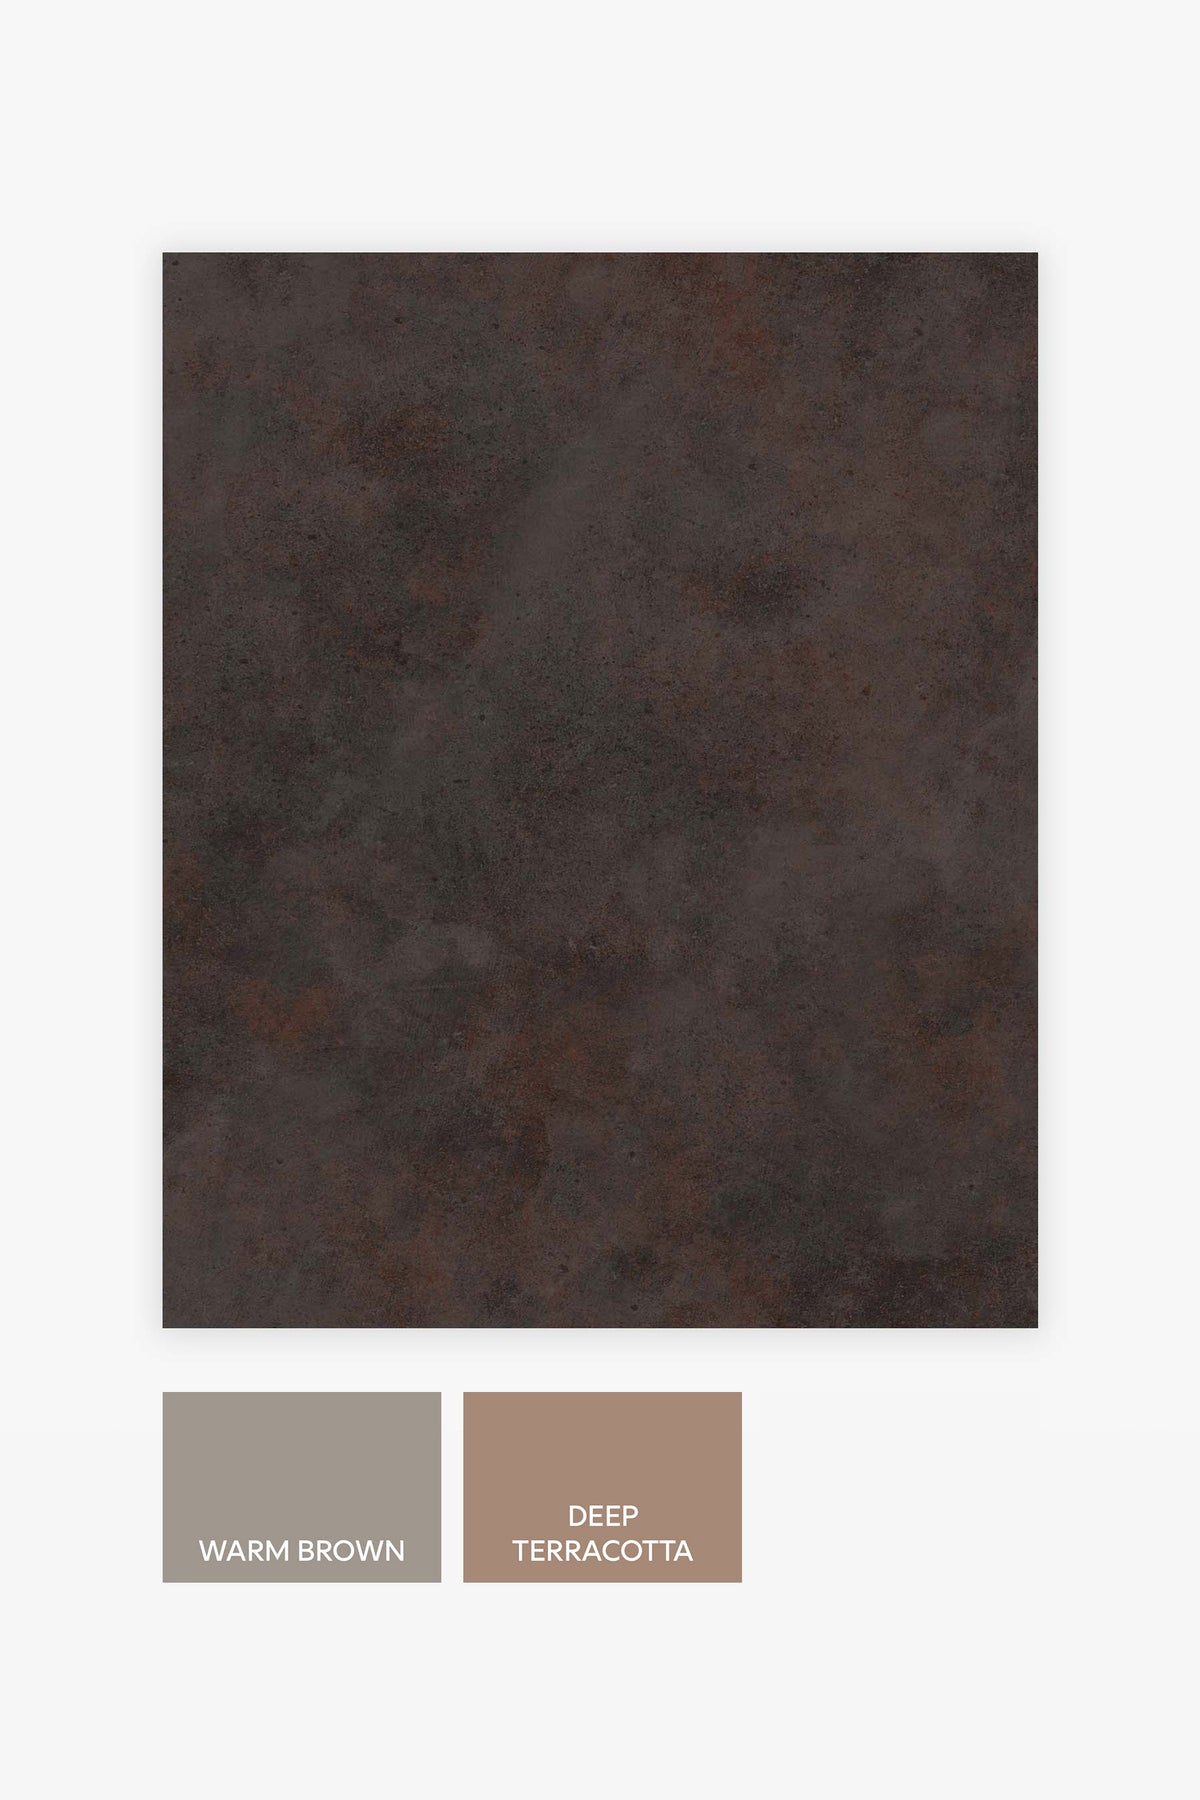 Plaster Abstract Brown